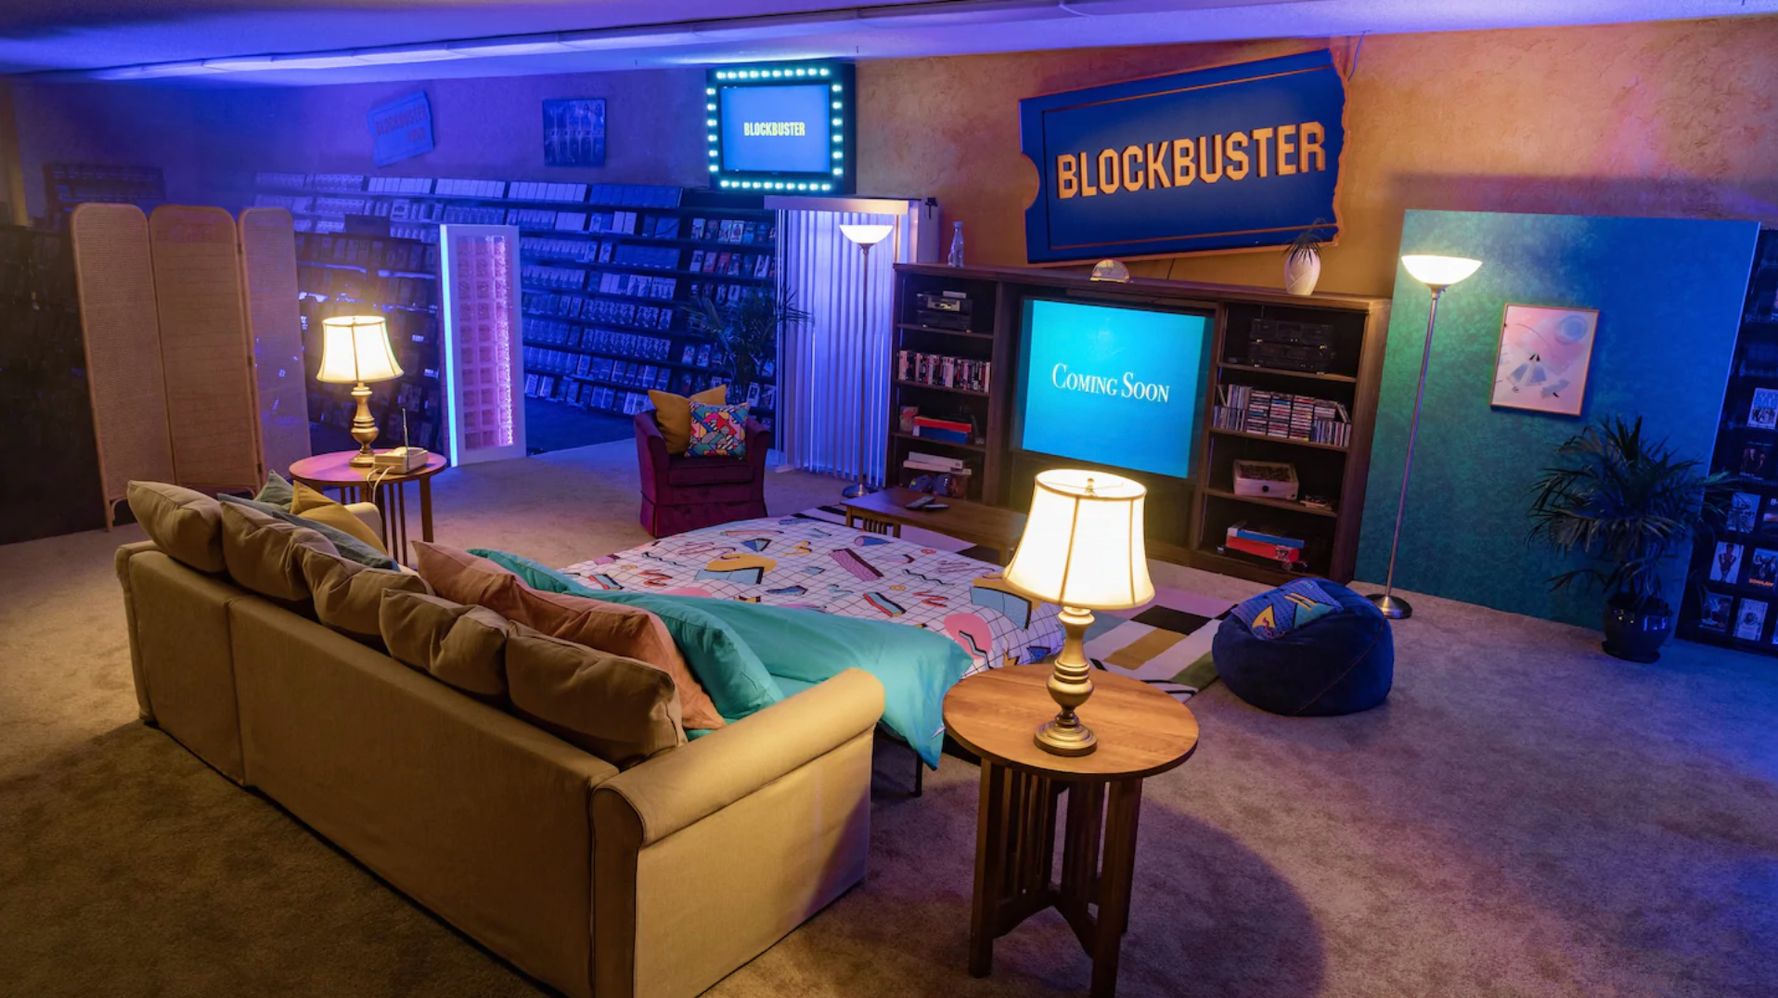 The World's Last Blockbuster Can Now Be Rented Out On Airbnb - HuffPost